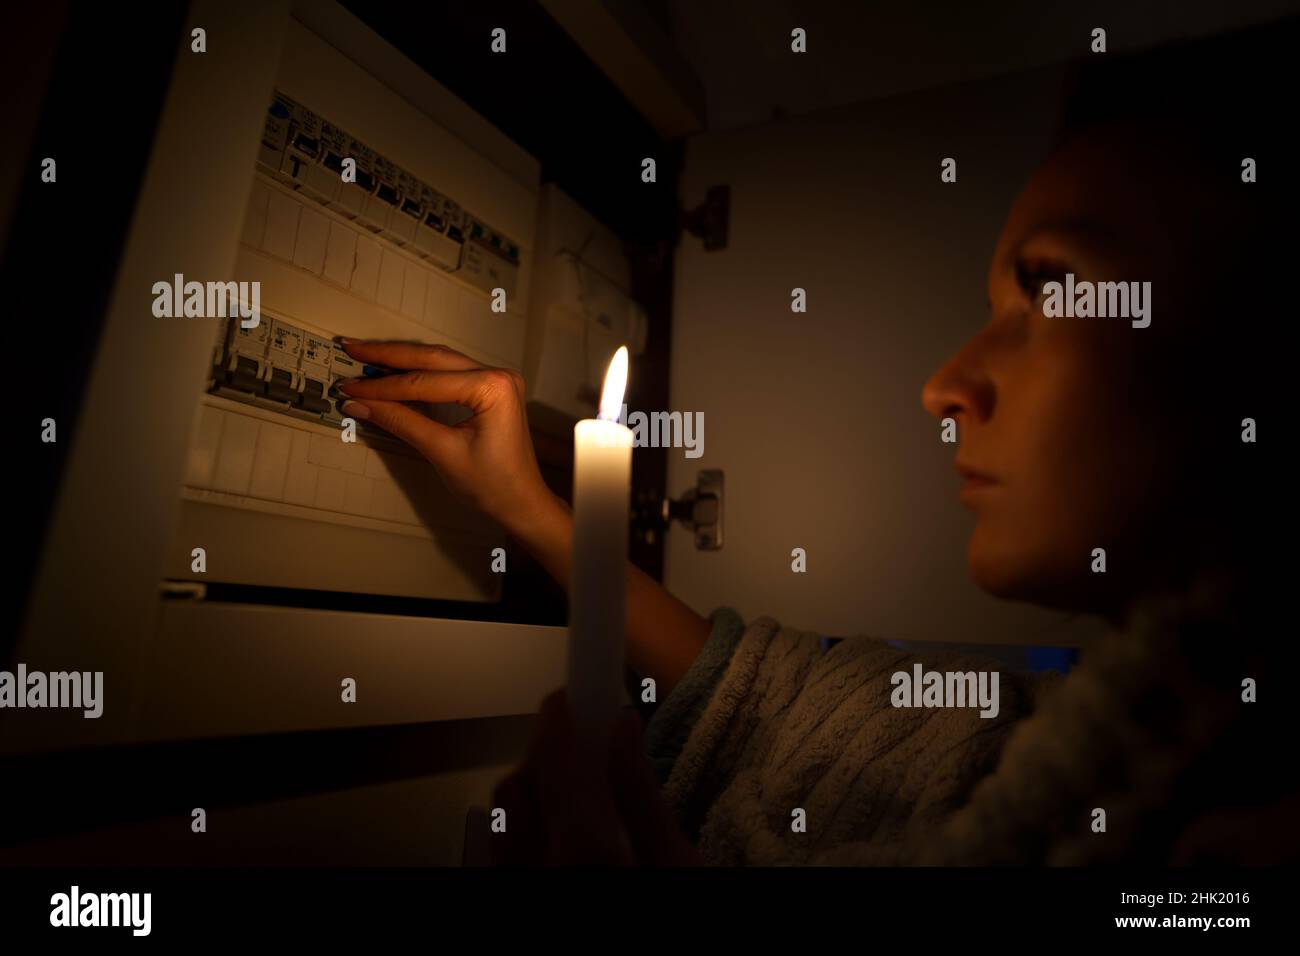 Woman in total darkness investigating fuse box at home during power outage or blackout. No electricity concept Stock Photo